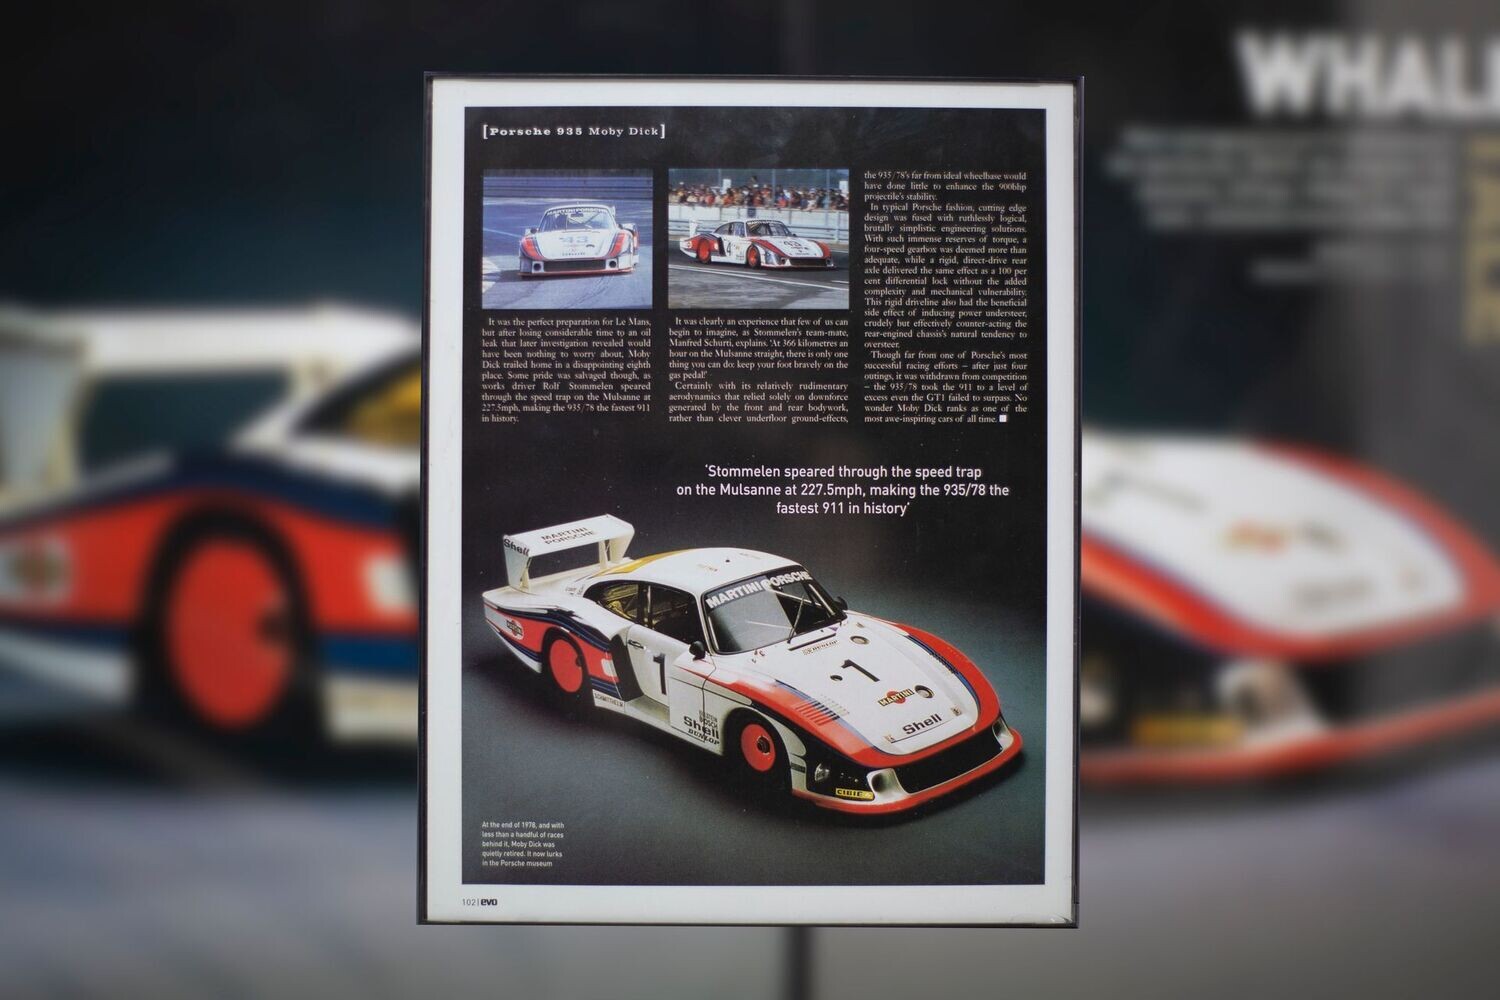 The Moby Dick Collection - Porsche 935 